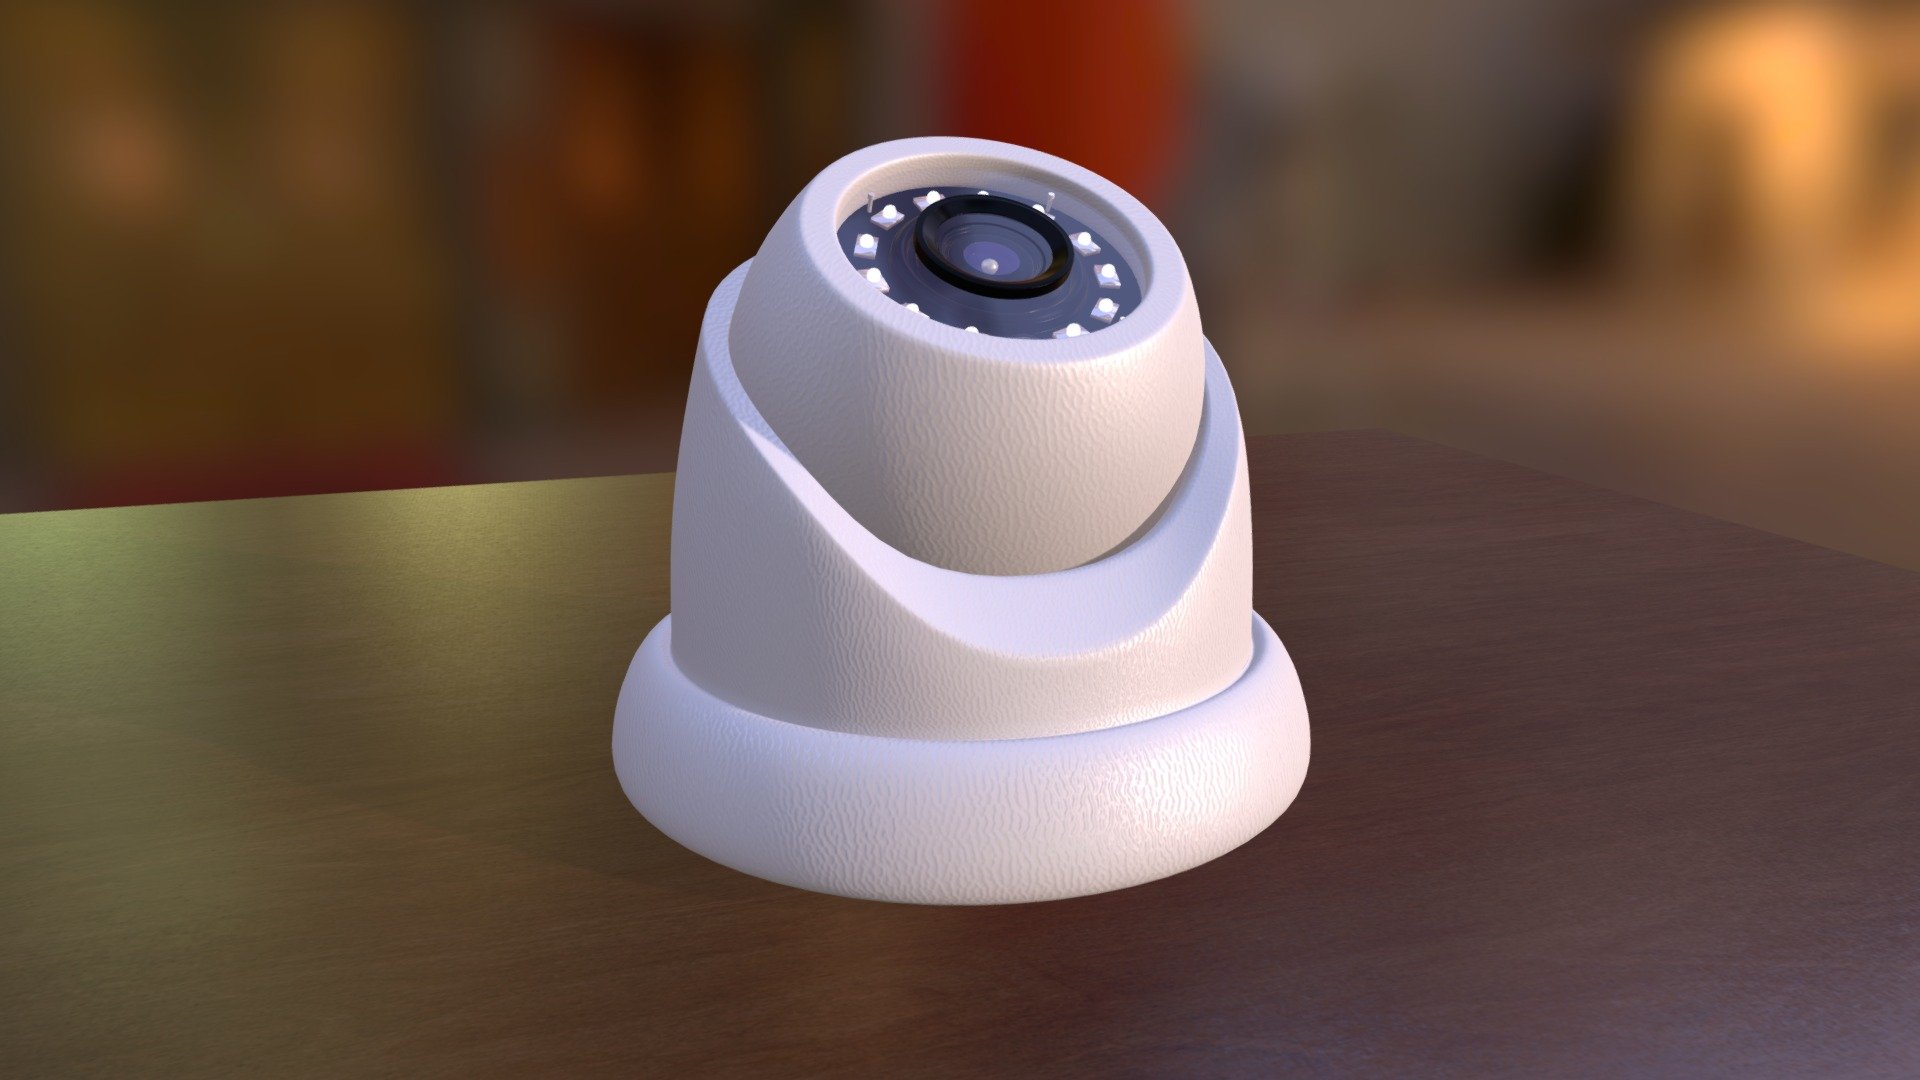 OBJECT: SECURITY DOME CAMERA